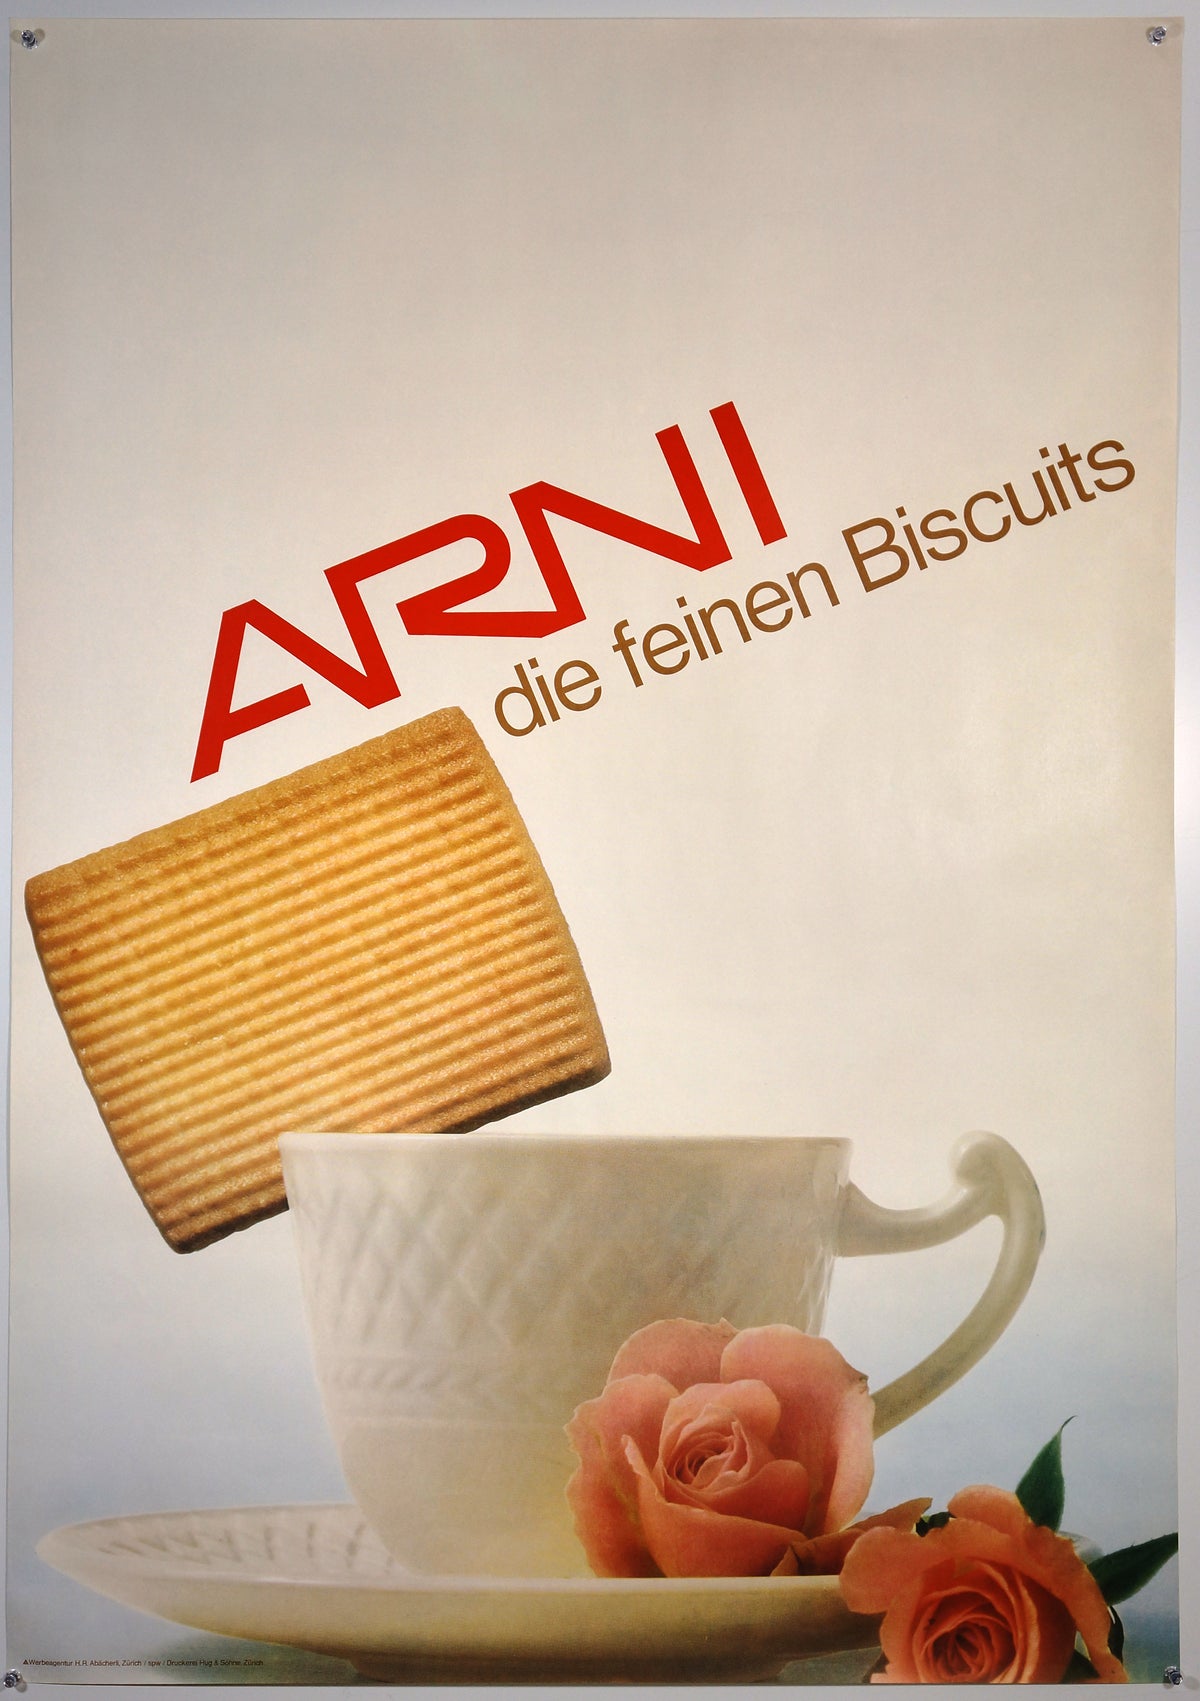 ARNI Biscuits - Authentic Vintage Poster